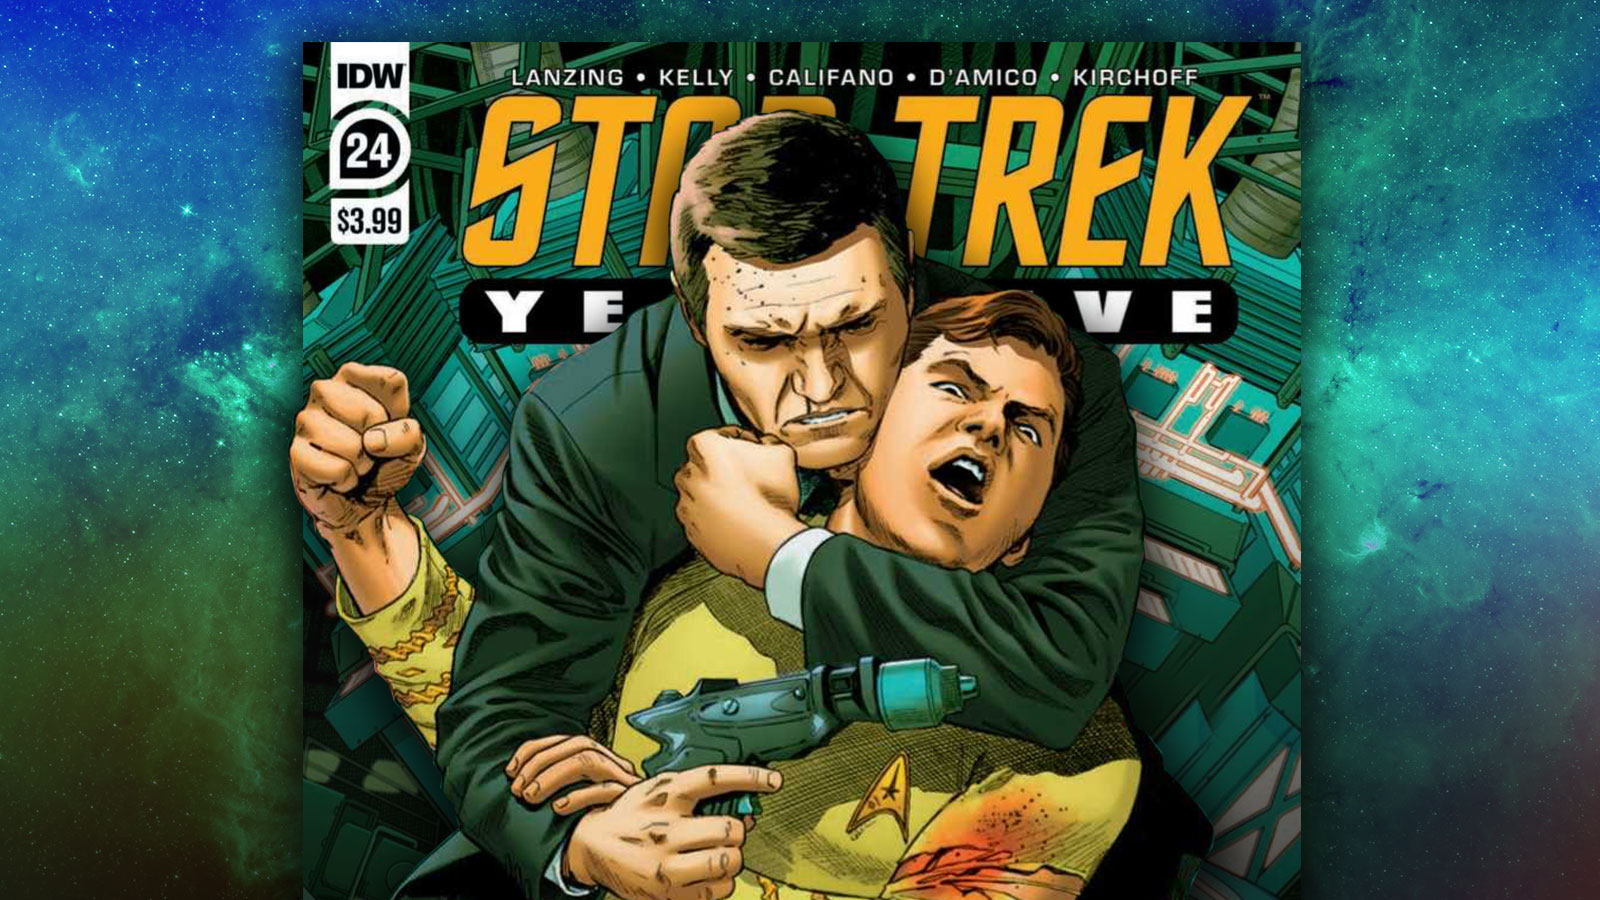 Star Trek: Year Five – Issue 24 Review: All Good Comics...